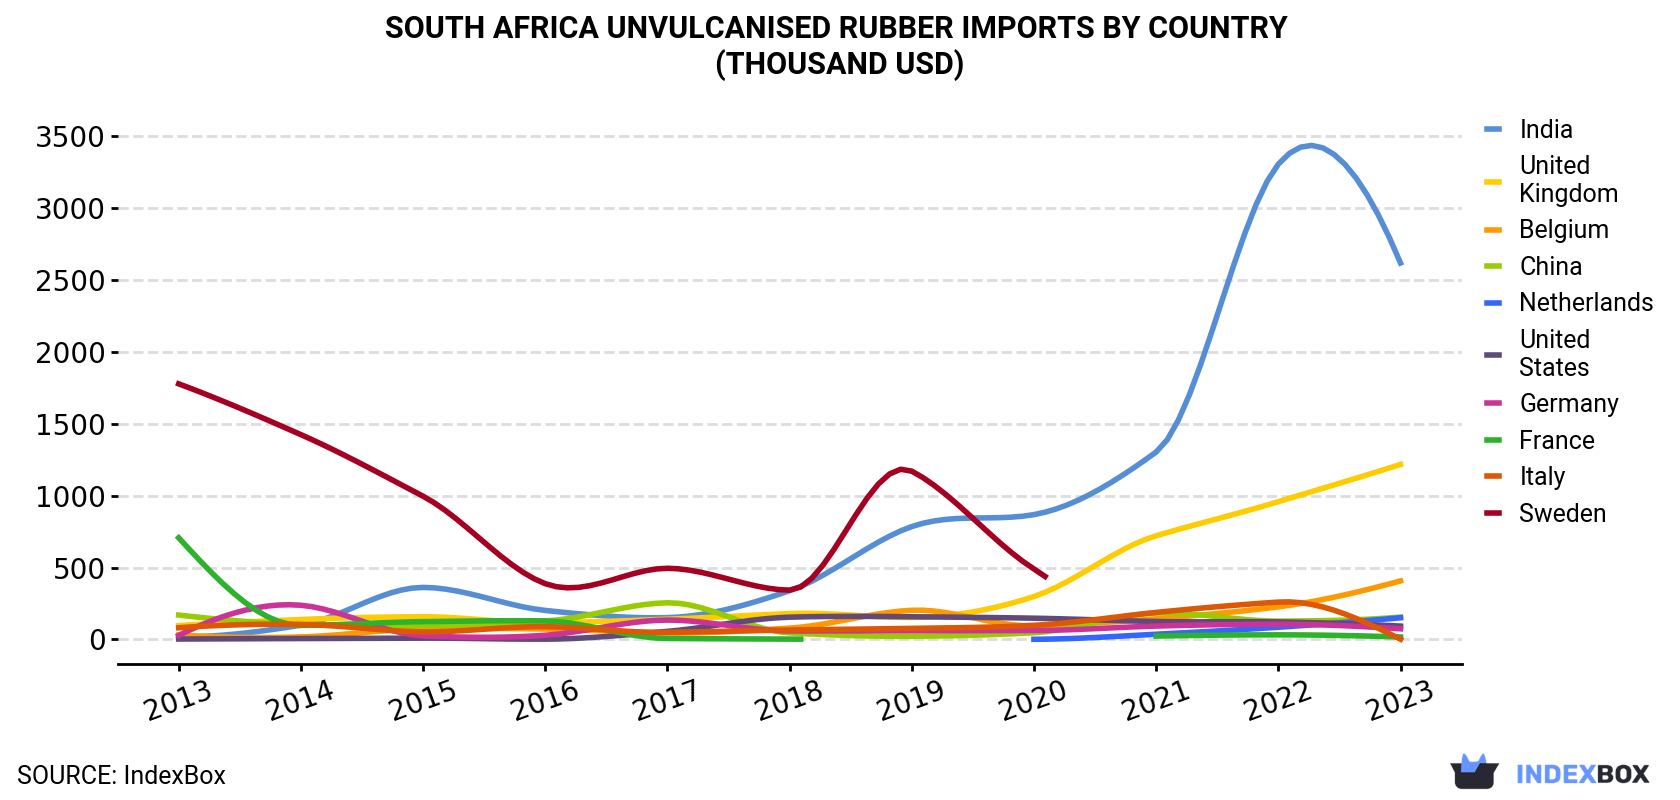 South Africa Unvulcanised Rubber Imports By Country (Thousand USD)